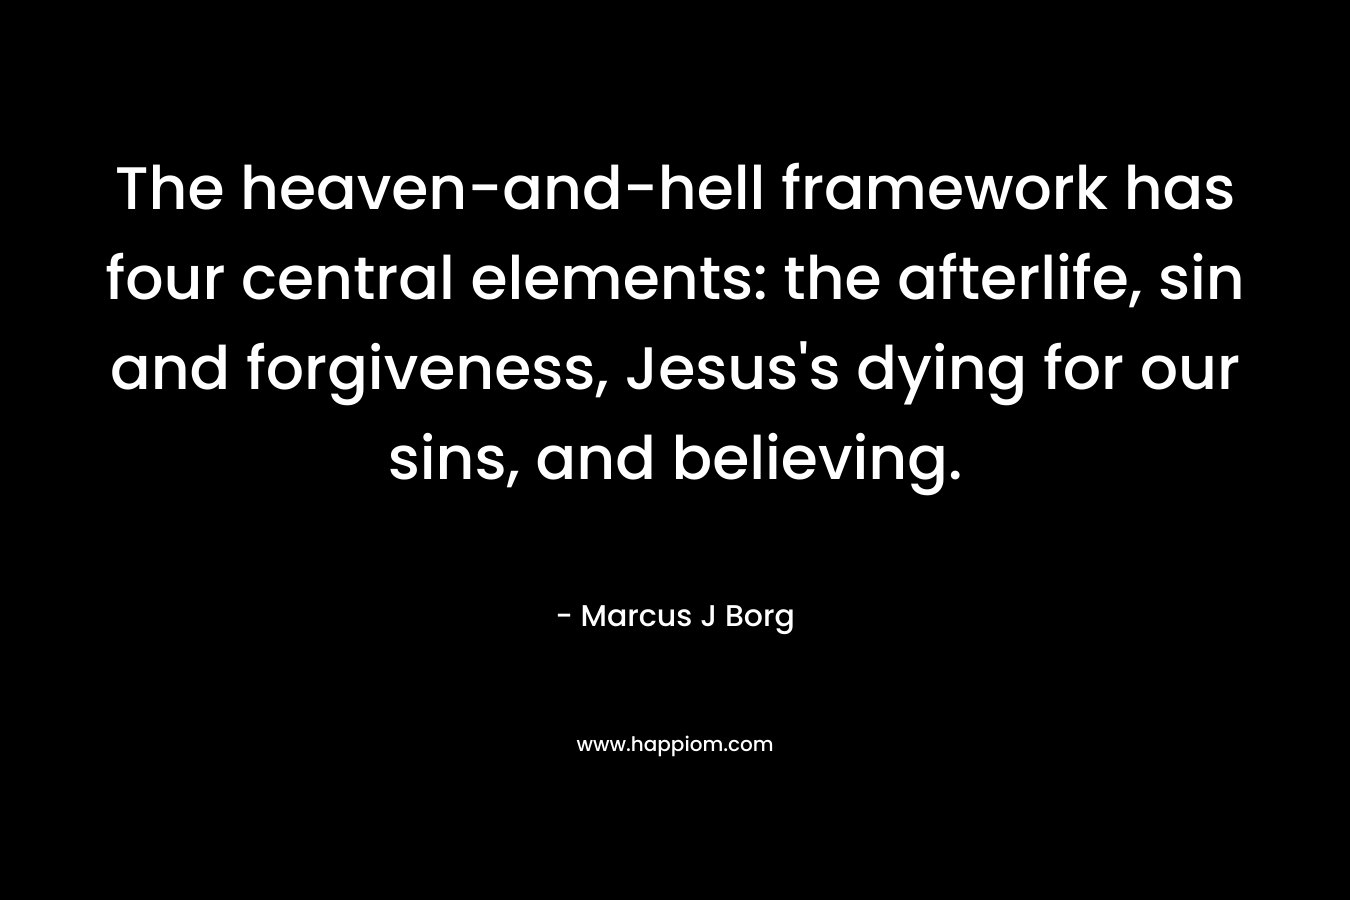 The heaven-and-hell framework has four central elements: the afterlife, sin and forgiveness, Jesus’s dying for our sins, and believing. – Marcus J Borg